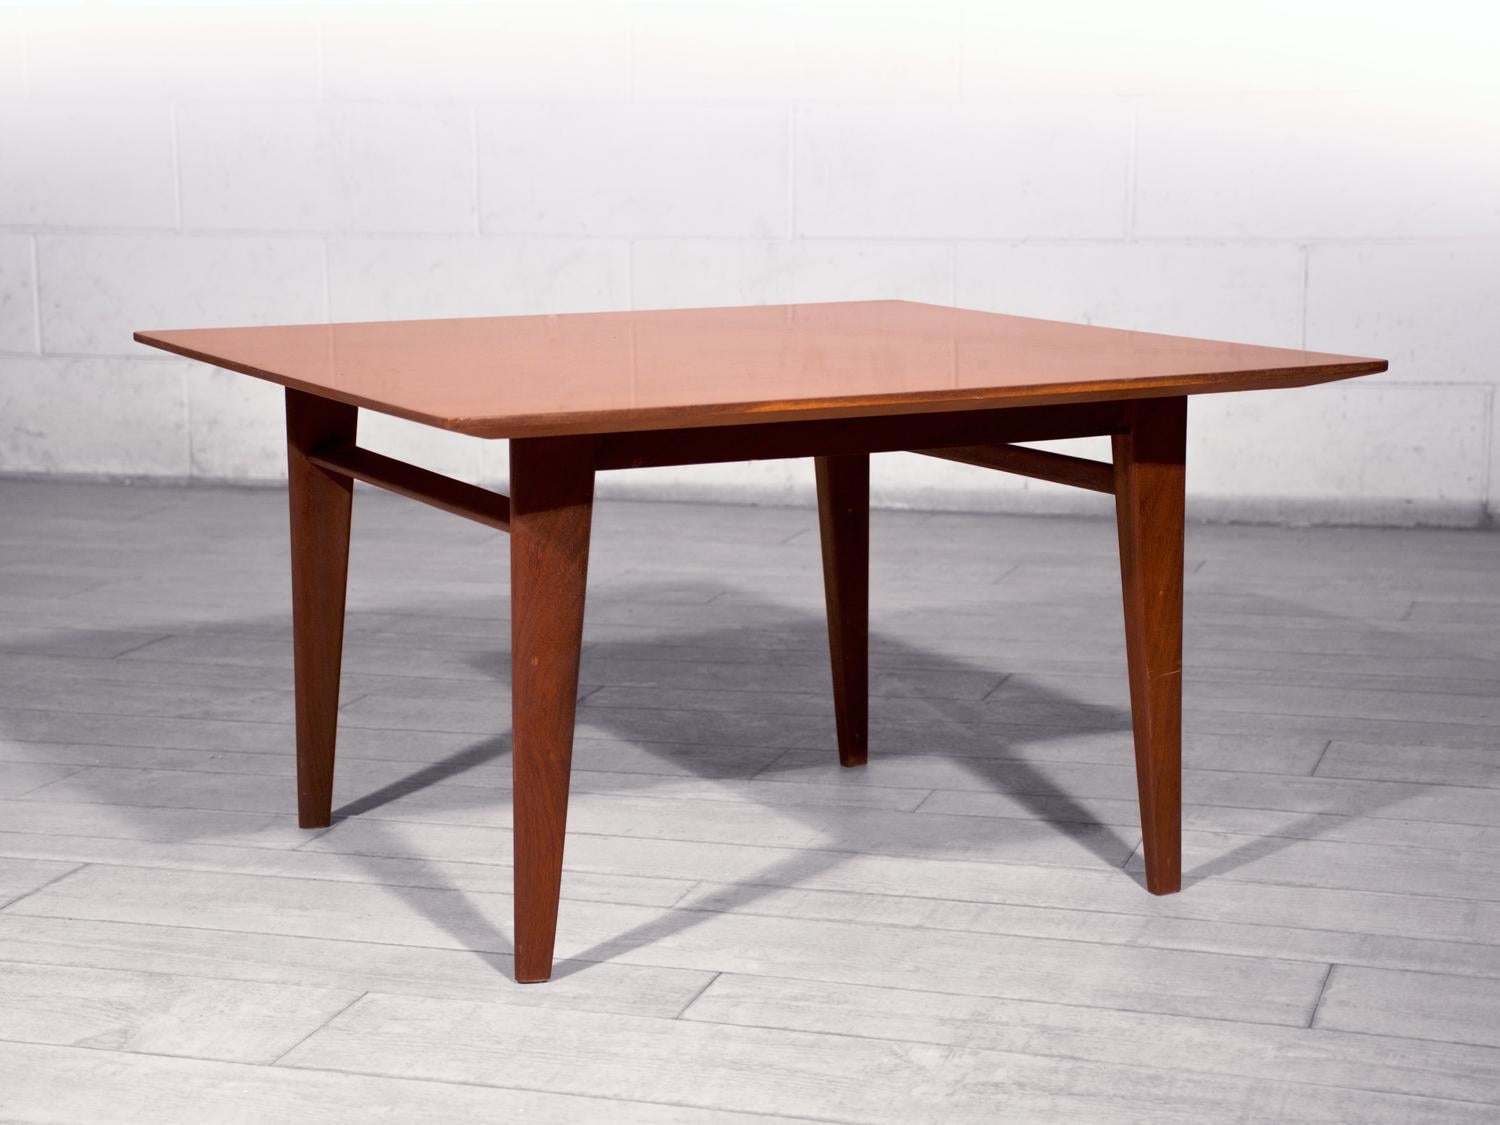 Italian Mid-Century Teak Wood Coffee Table by Vittorio Dassi, 1960s In Good Condition For Sale In Traversetolo, IT